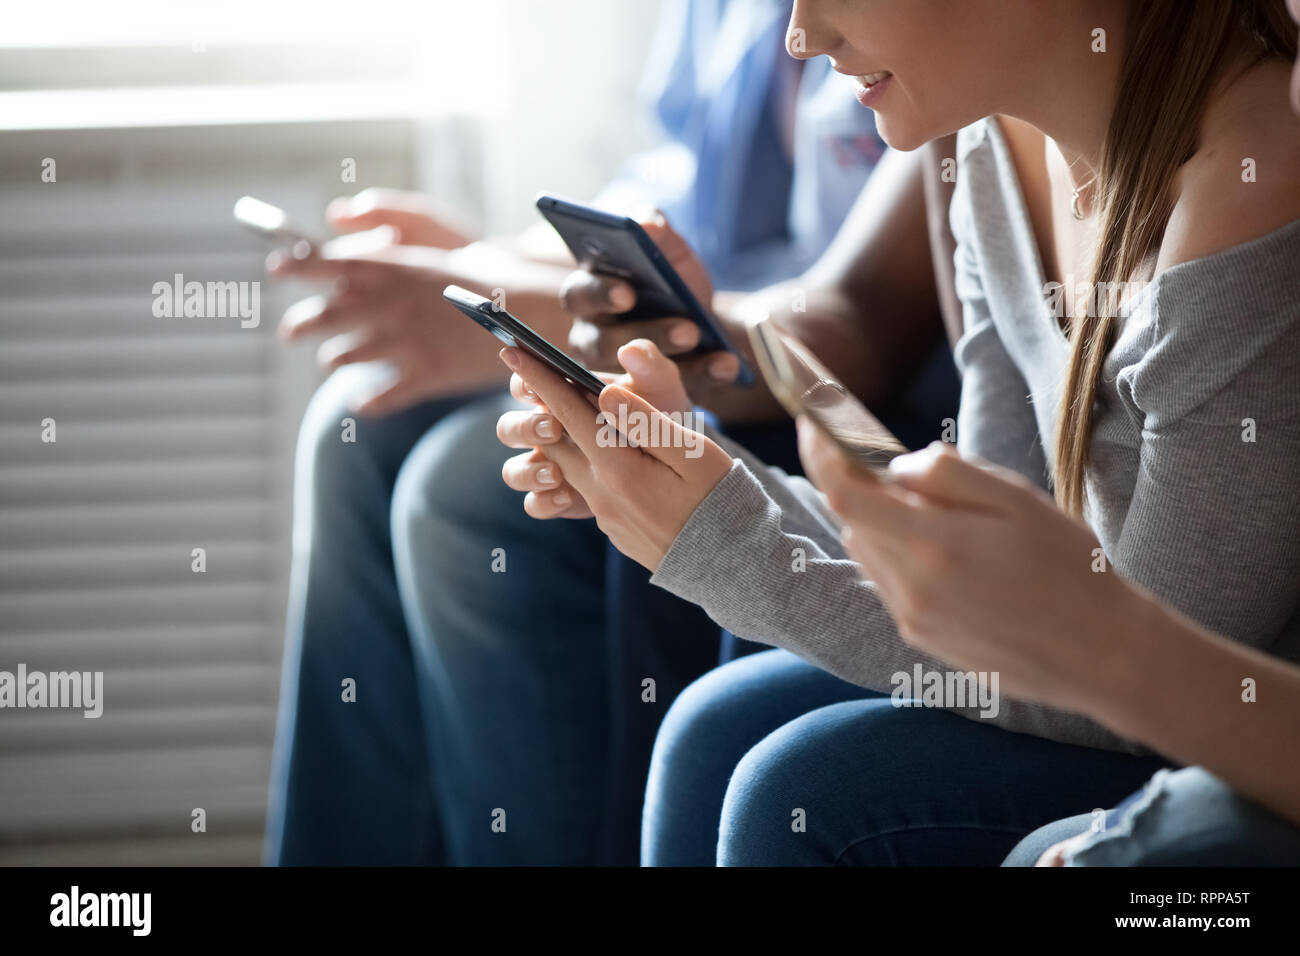 Close up people sitting in row, smiling young woman using phone Stock Photo